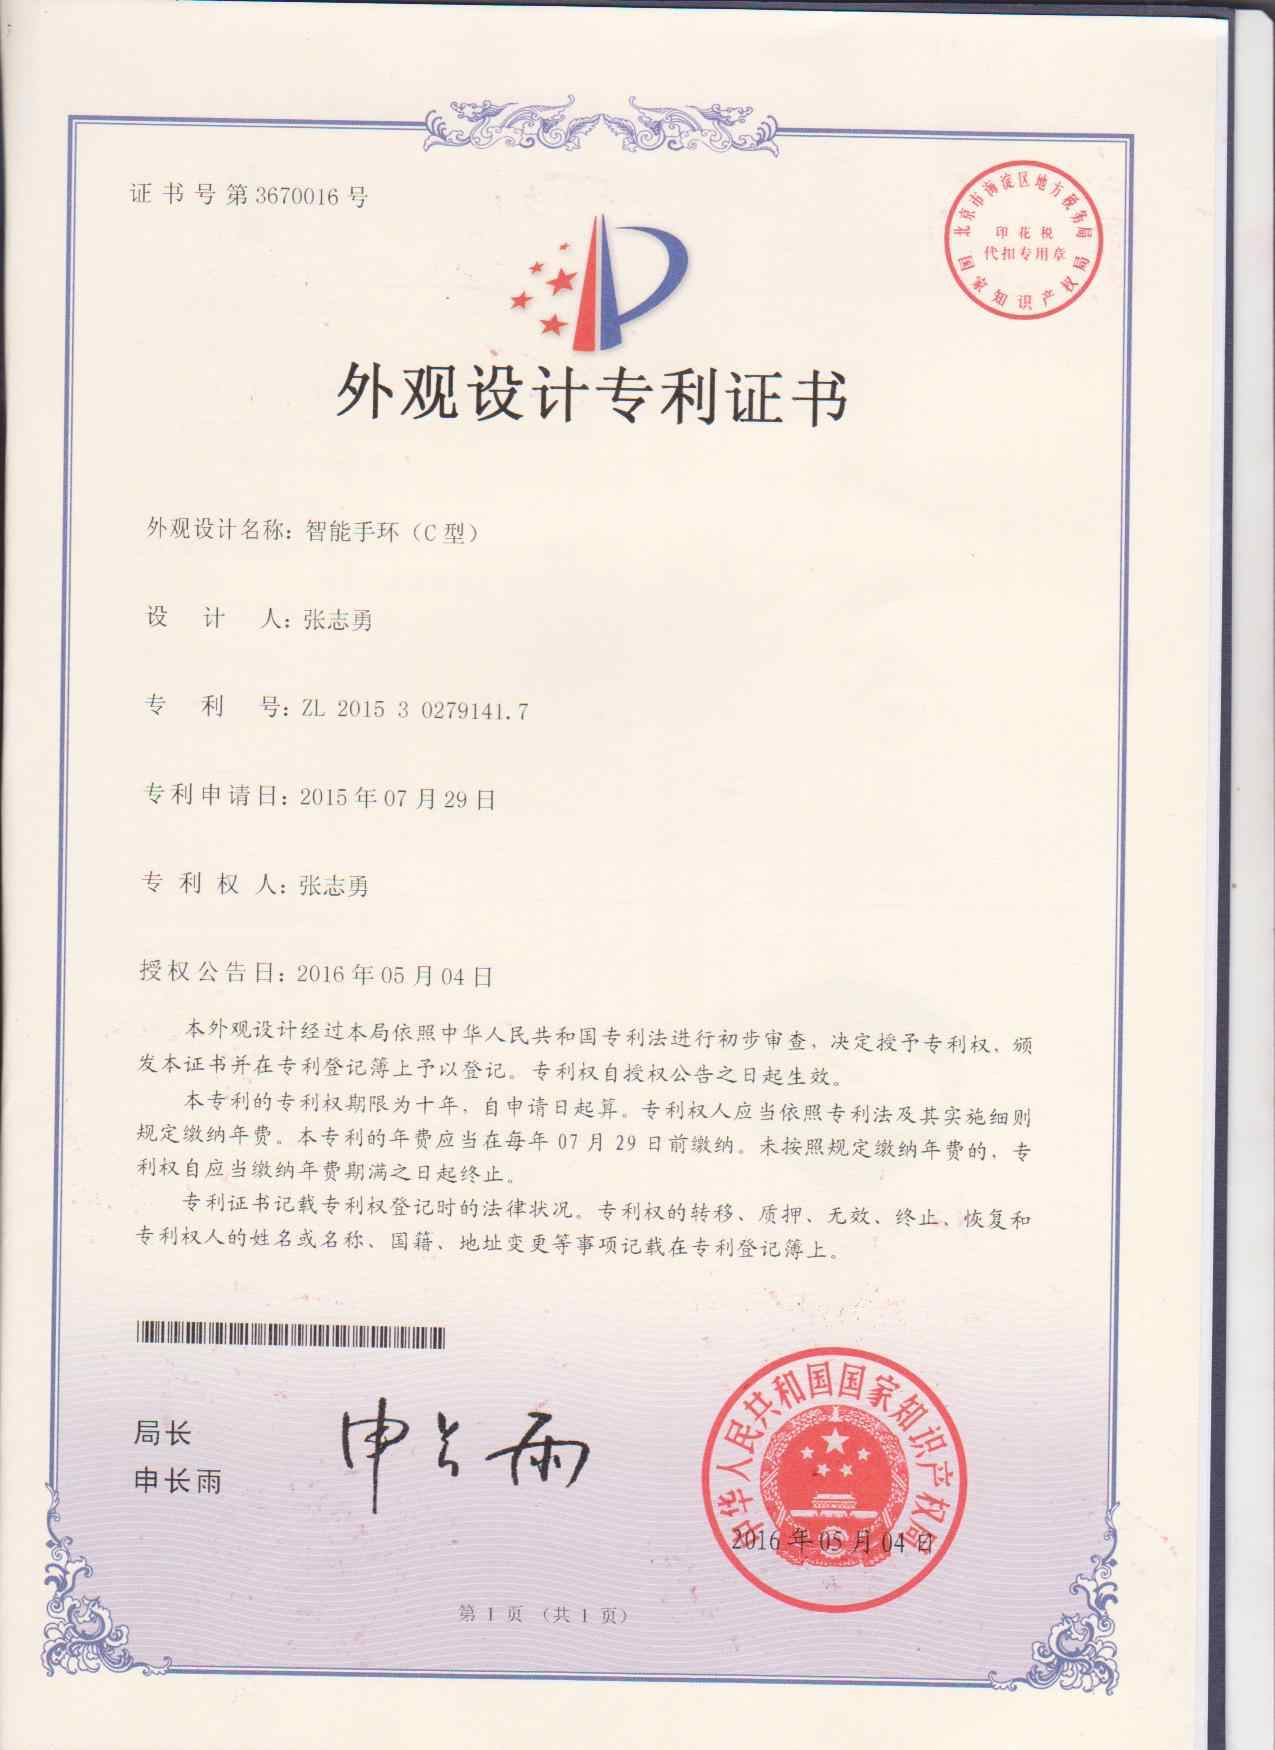 Appearance of the patent certificate of I95 smart watch